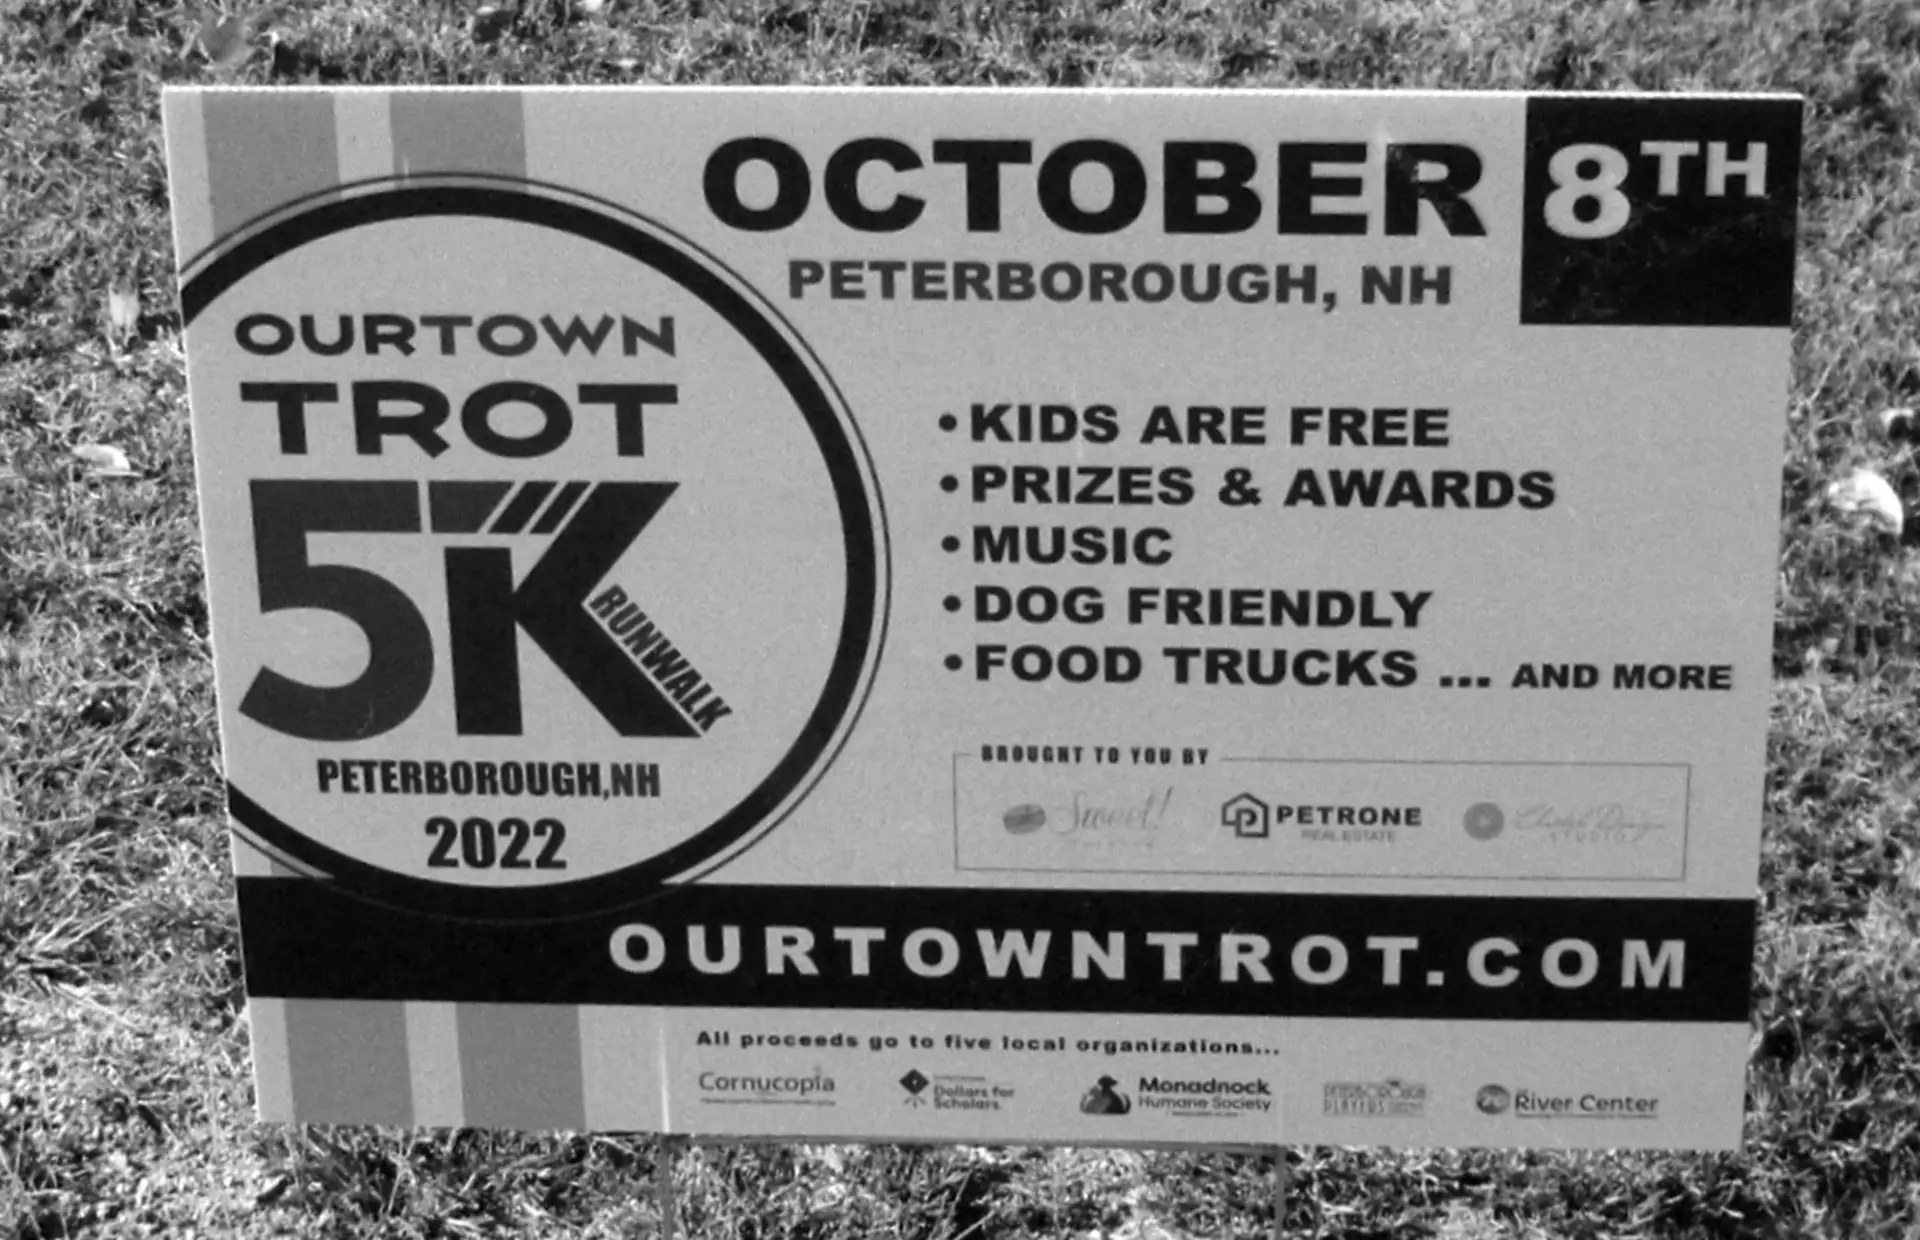 OurTownTrot sign